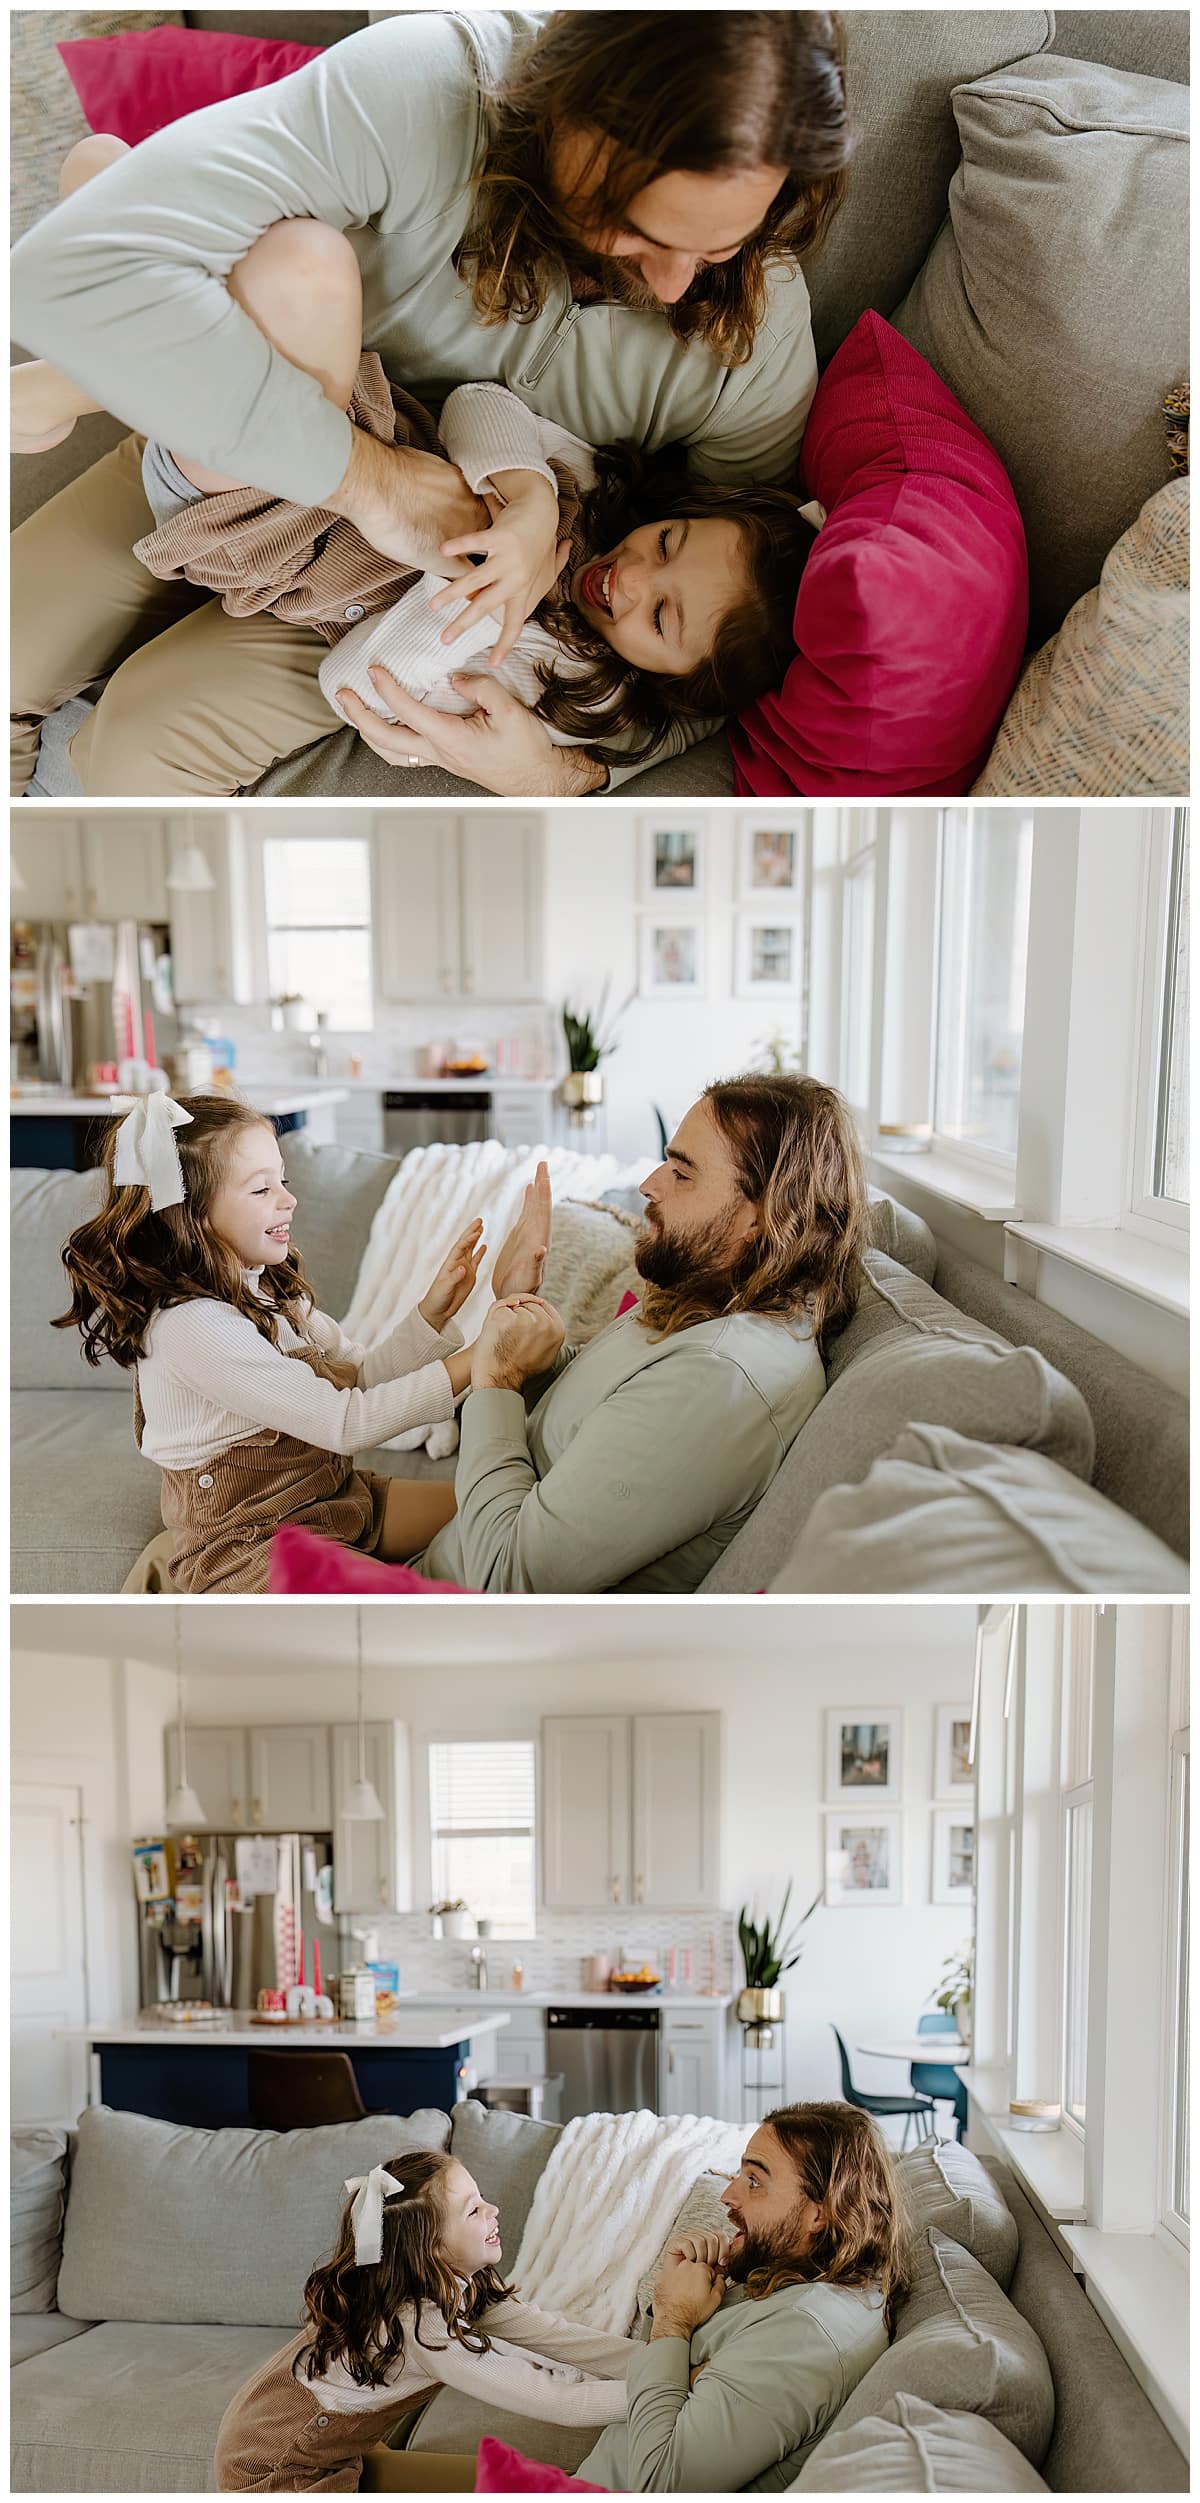 Dad and daughter play together during In-Home Documentary Family Photos